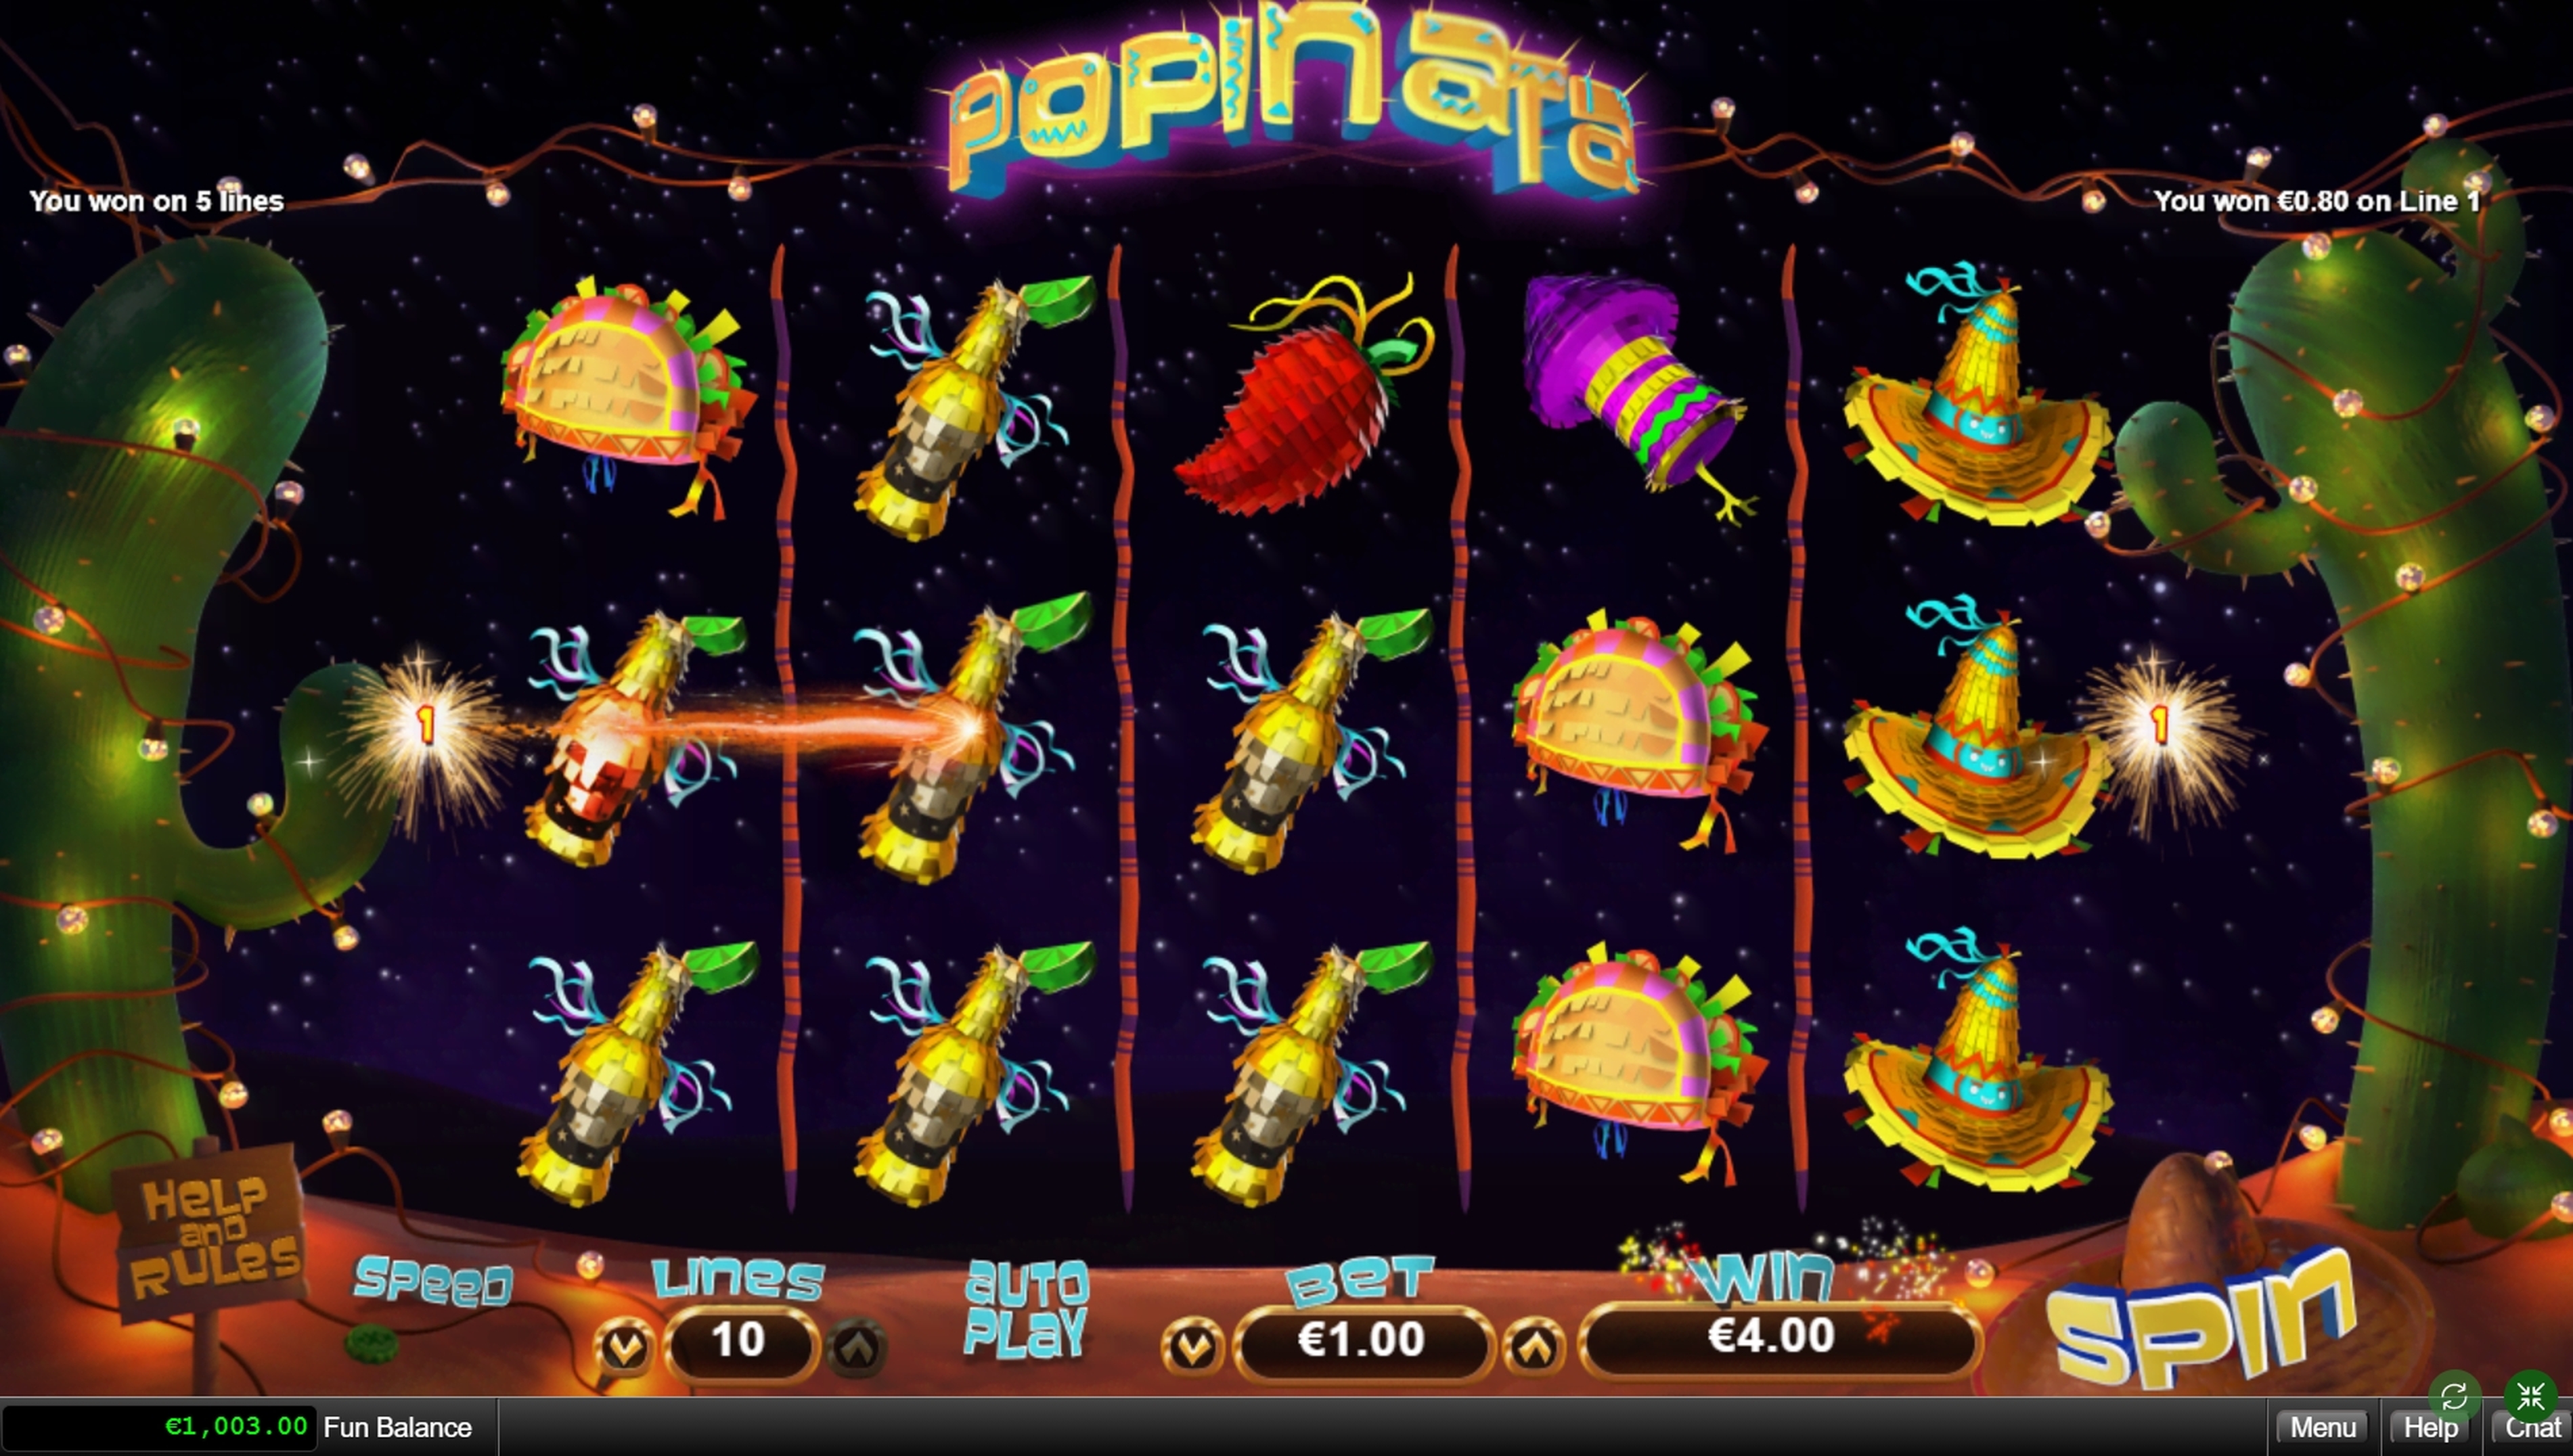 Win Money in Popinata Free Slot Game by Real Time Gaming